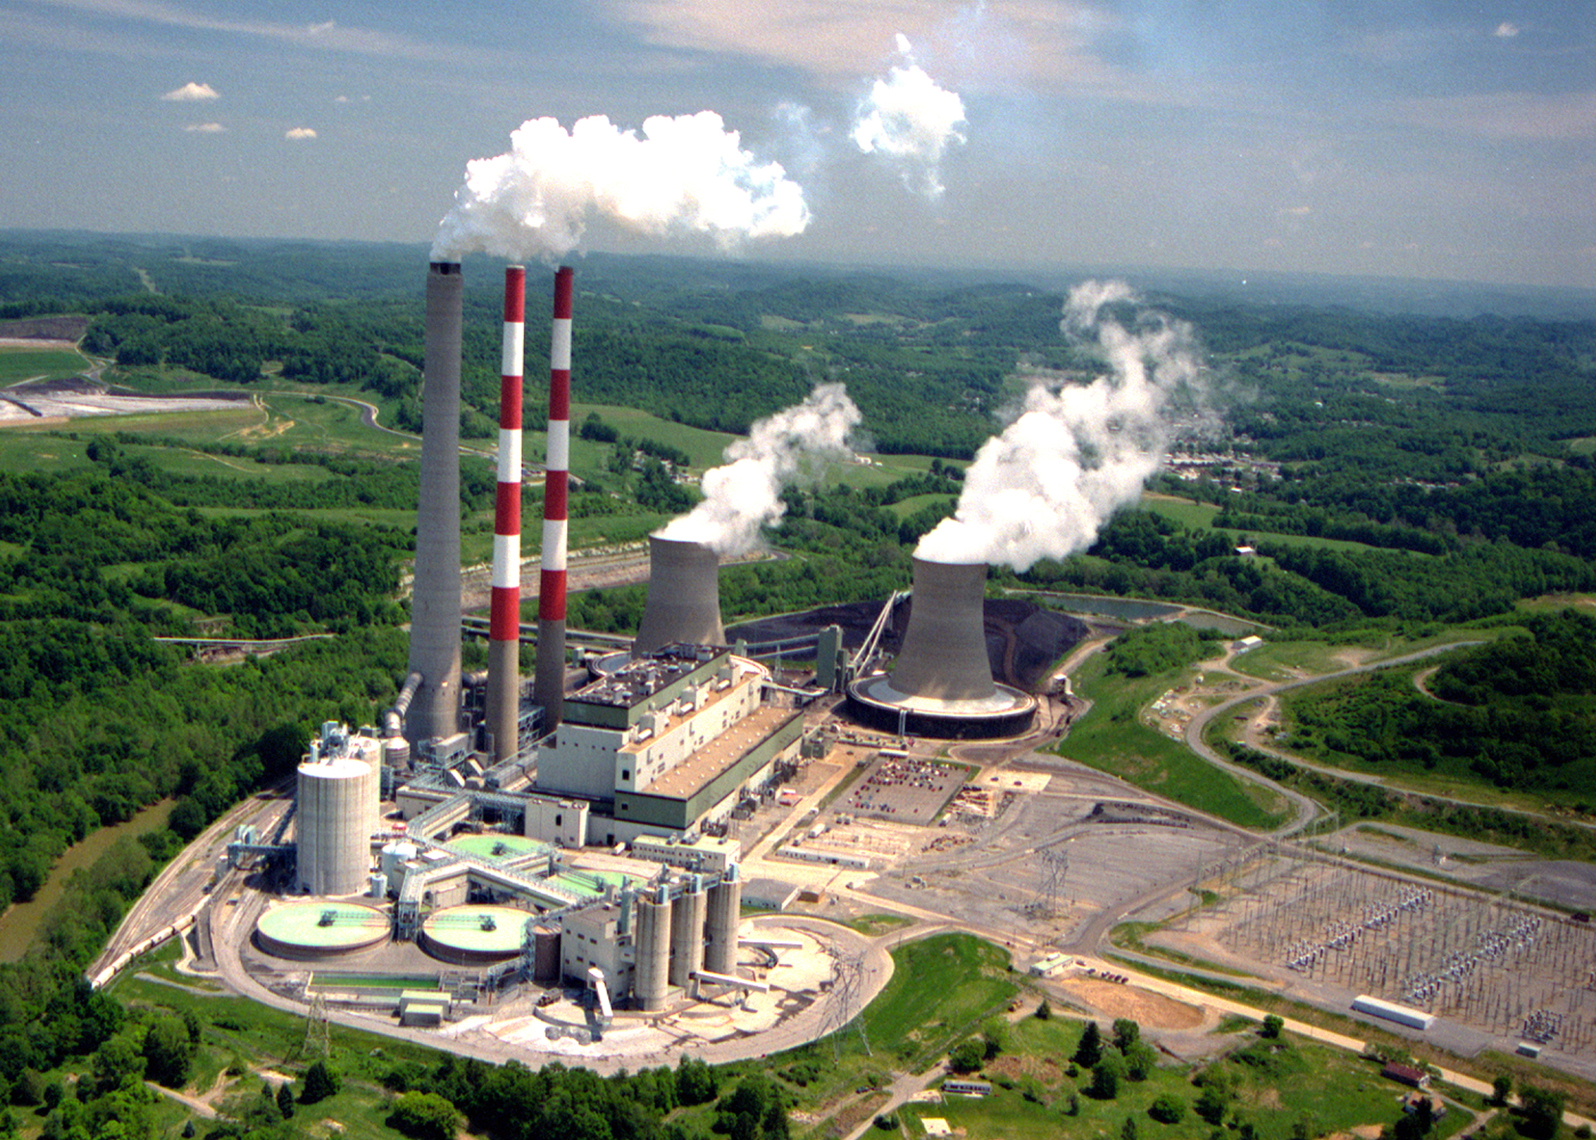 One of FirstEnergy's dirty coal plants. They've got a bunch of them.